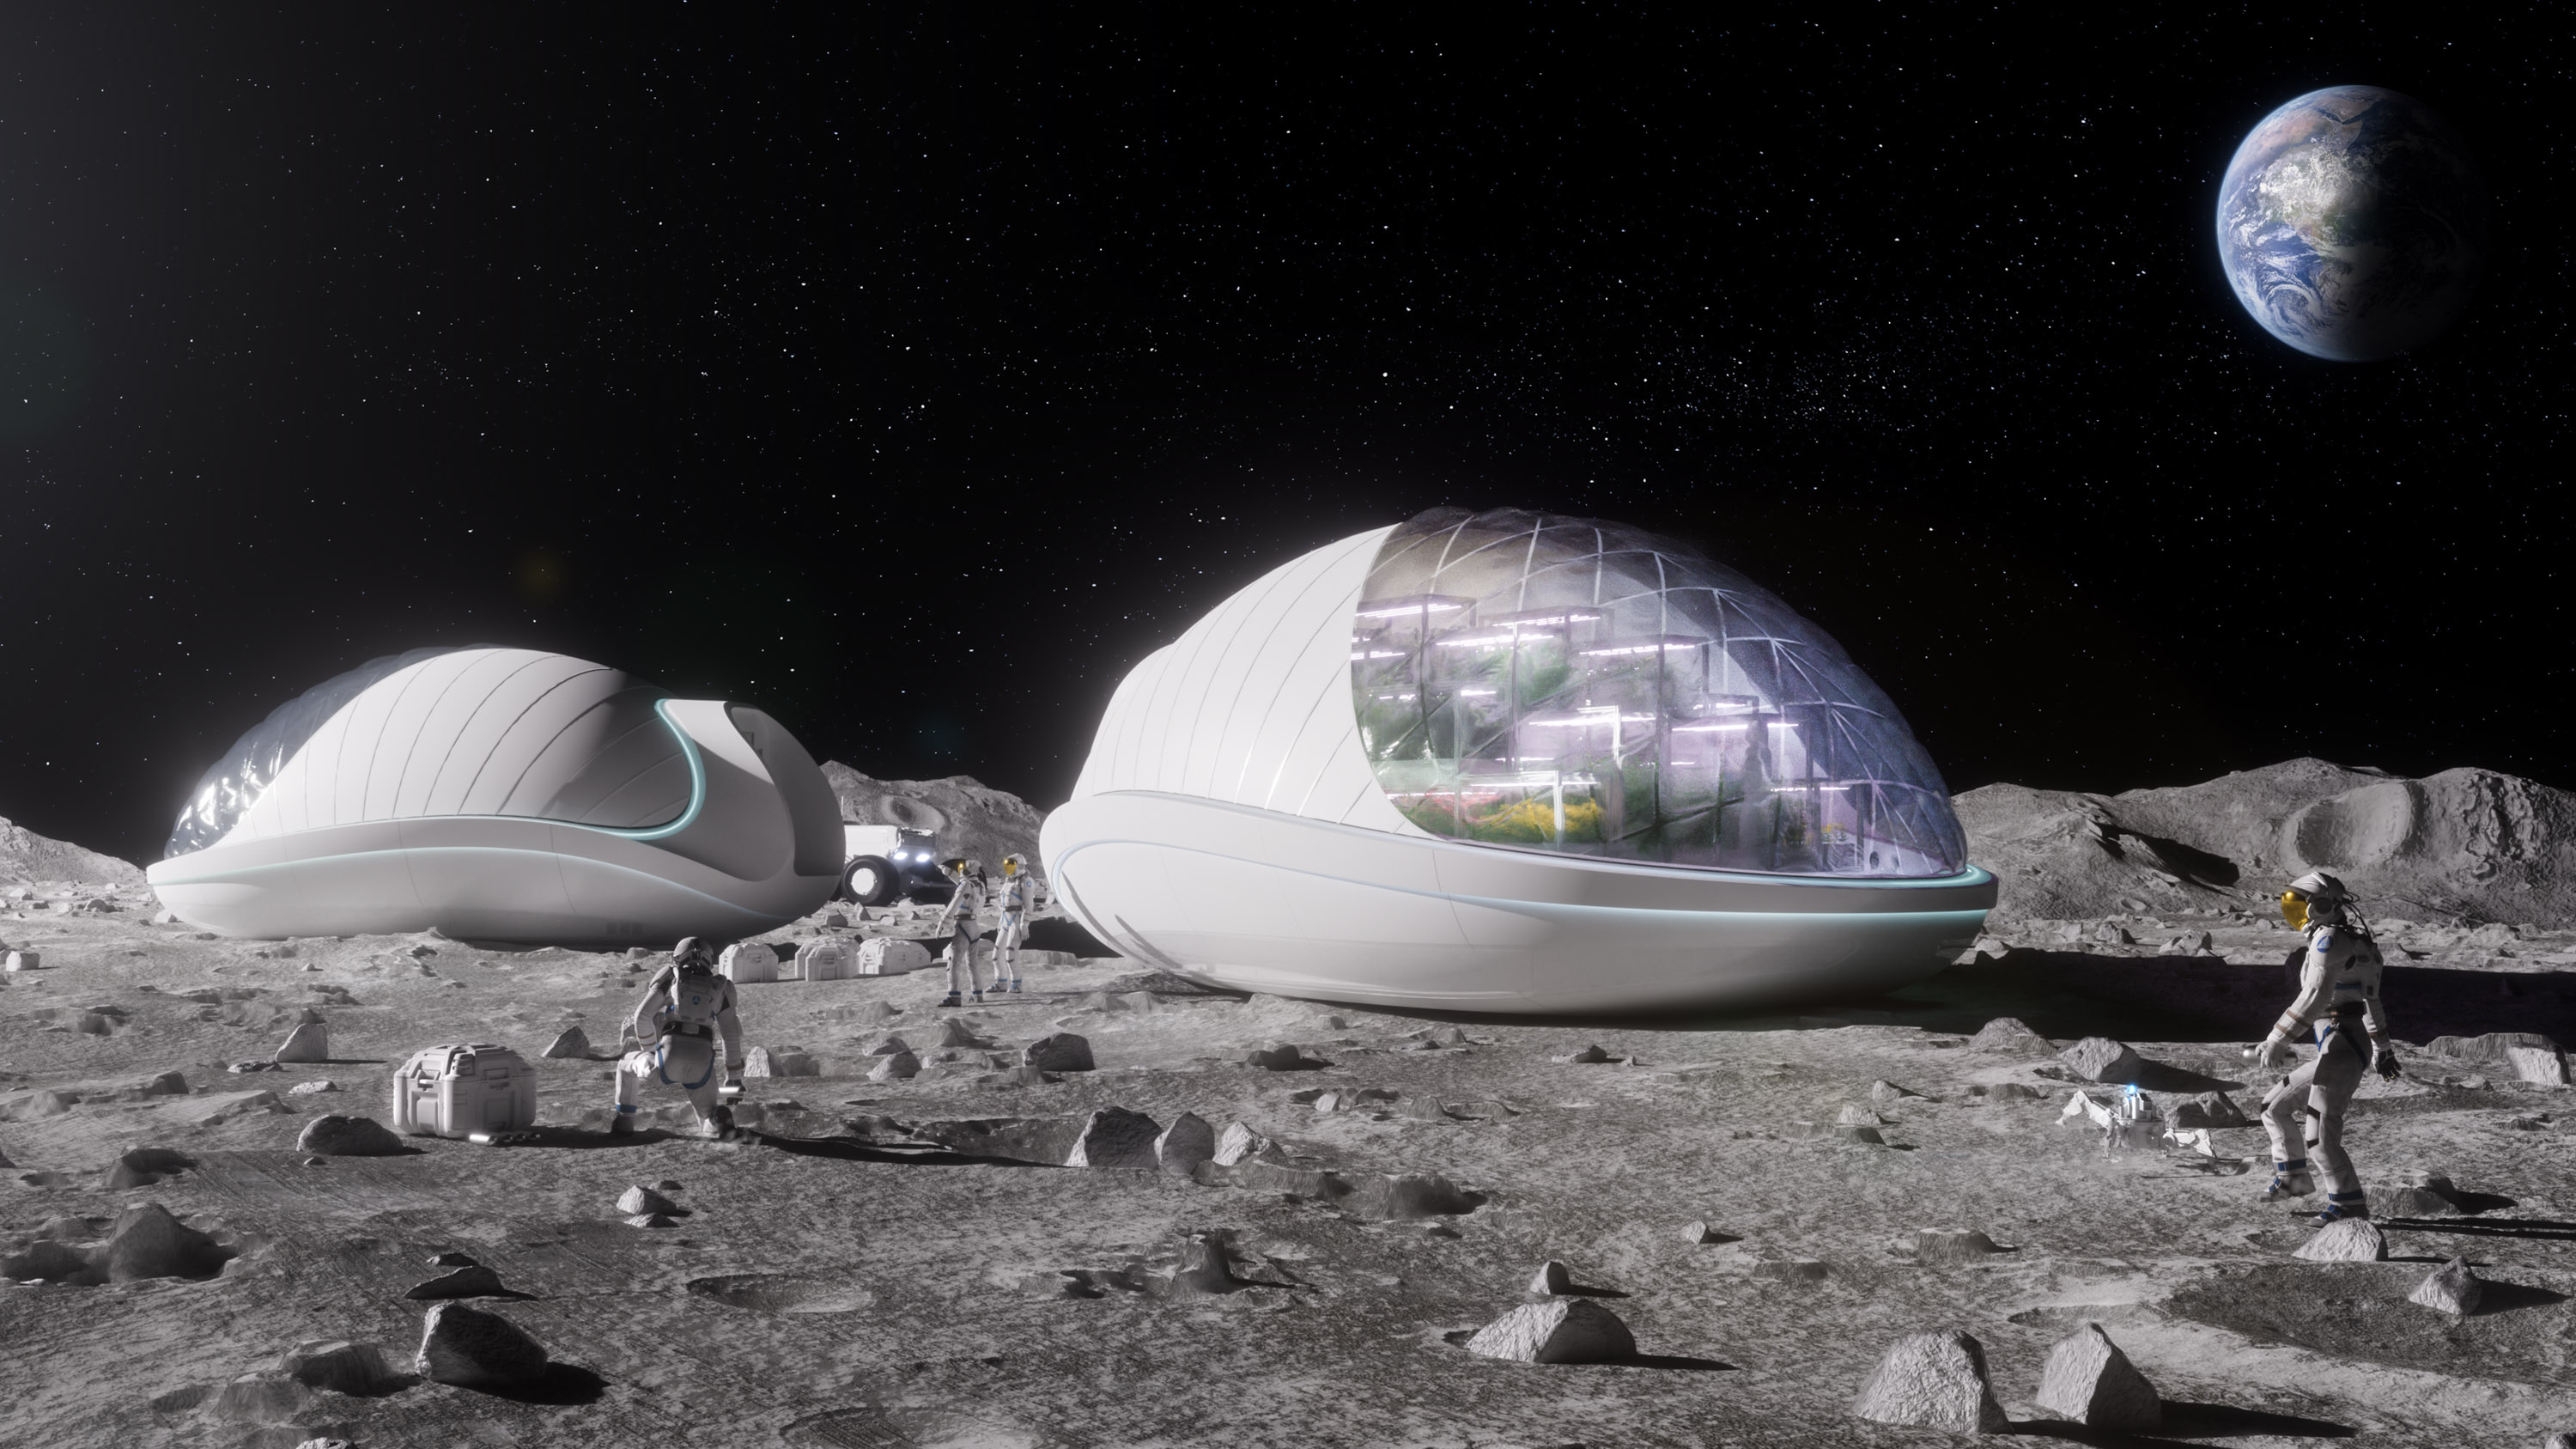 artist&#039;s rendering of two biopods on the moon with astronauts walking nearby.